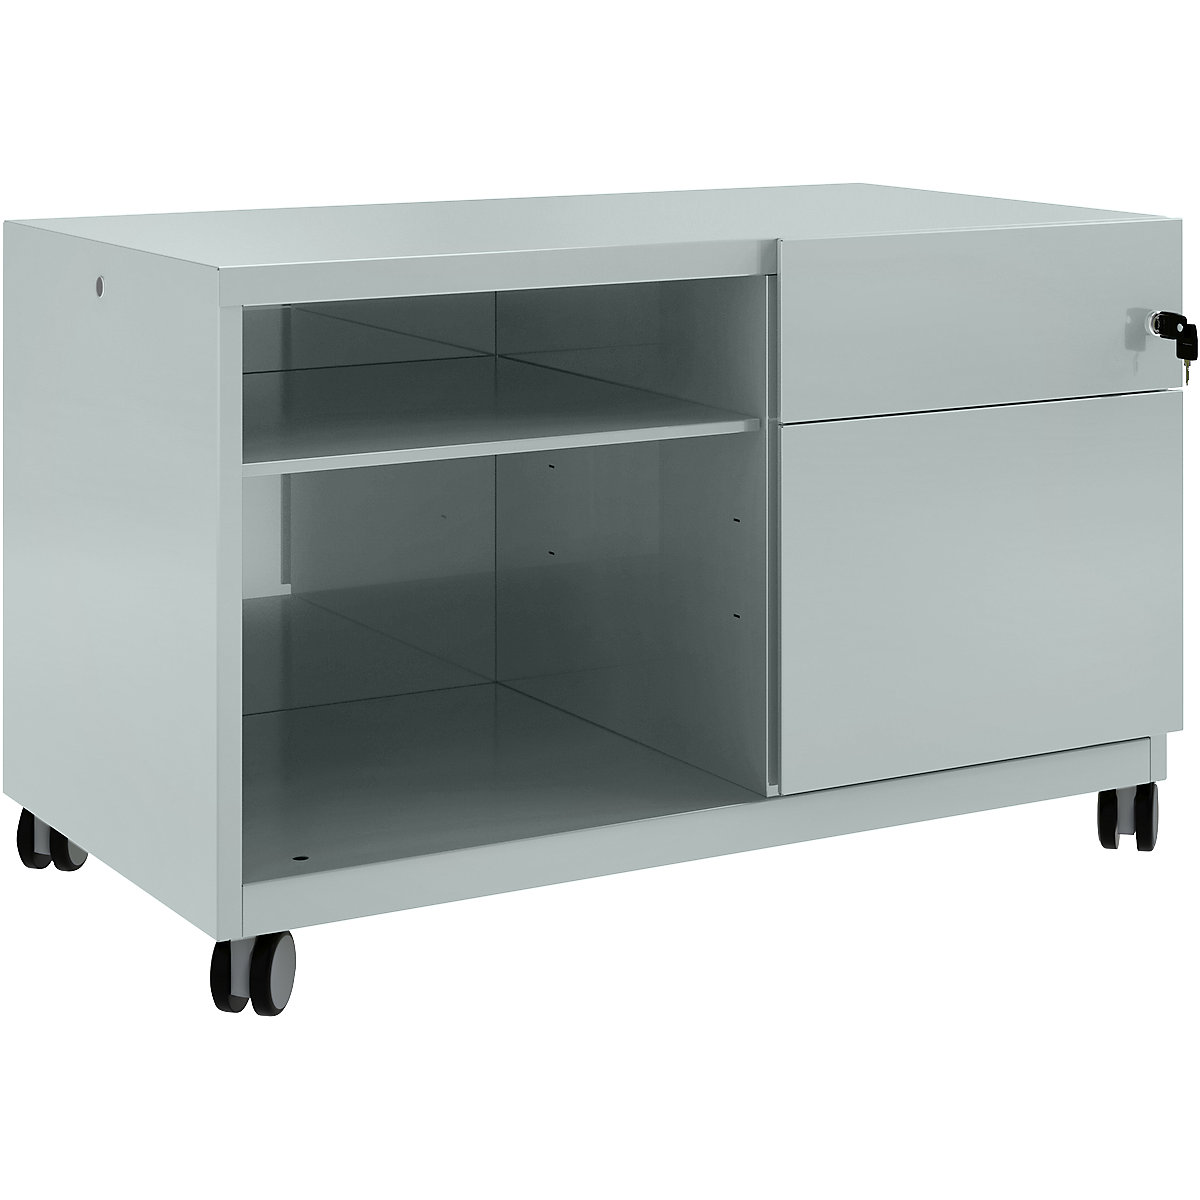 Chariot Note&trade; CADDY, h x l x p 563 x 900 x 490 mm - BISLEY